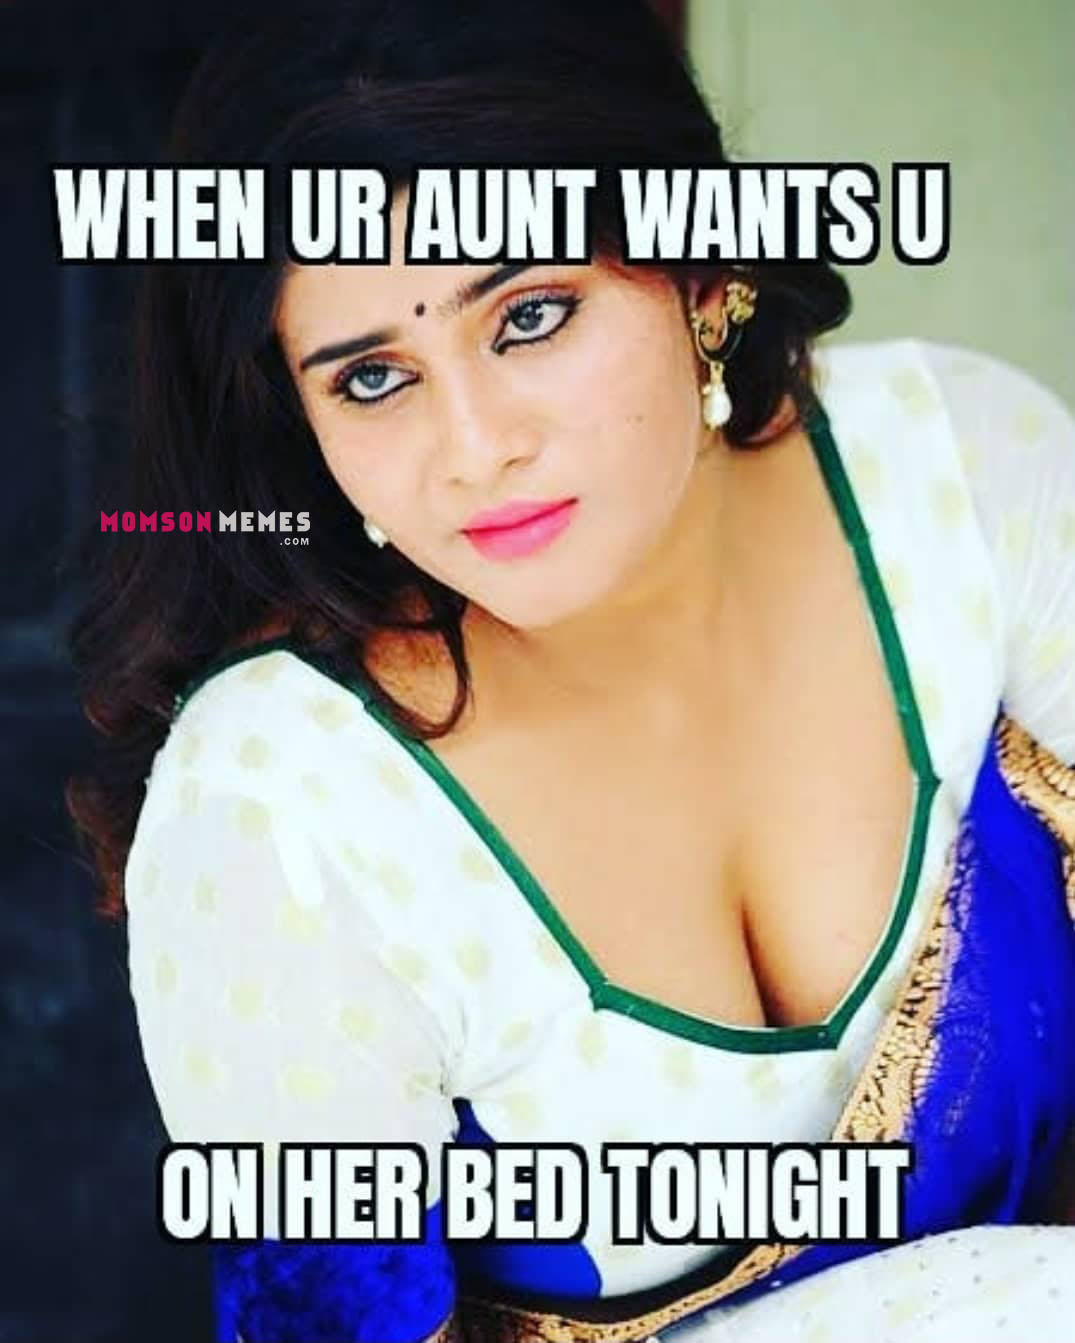 Aunt wants me on her bed tonight!